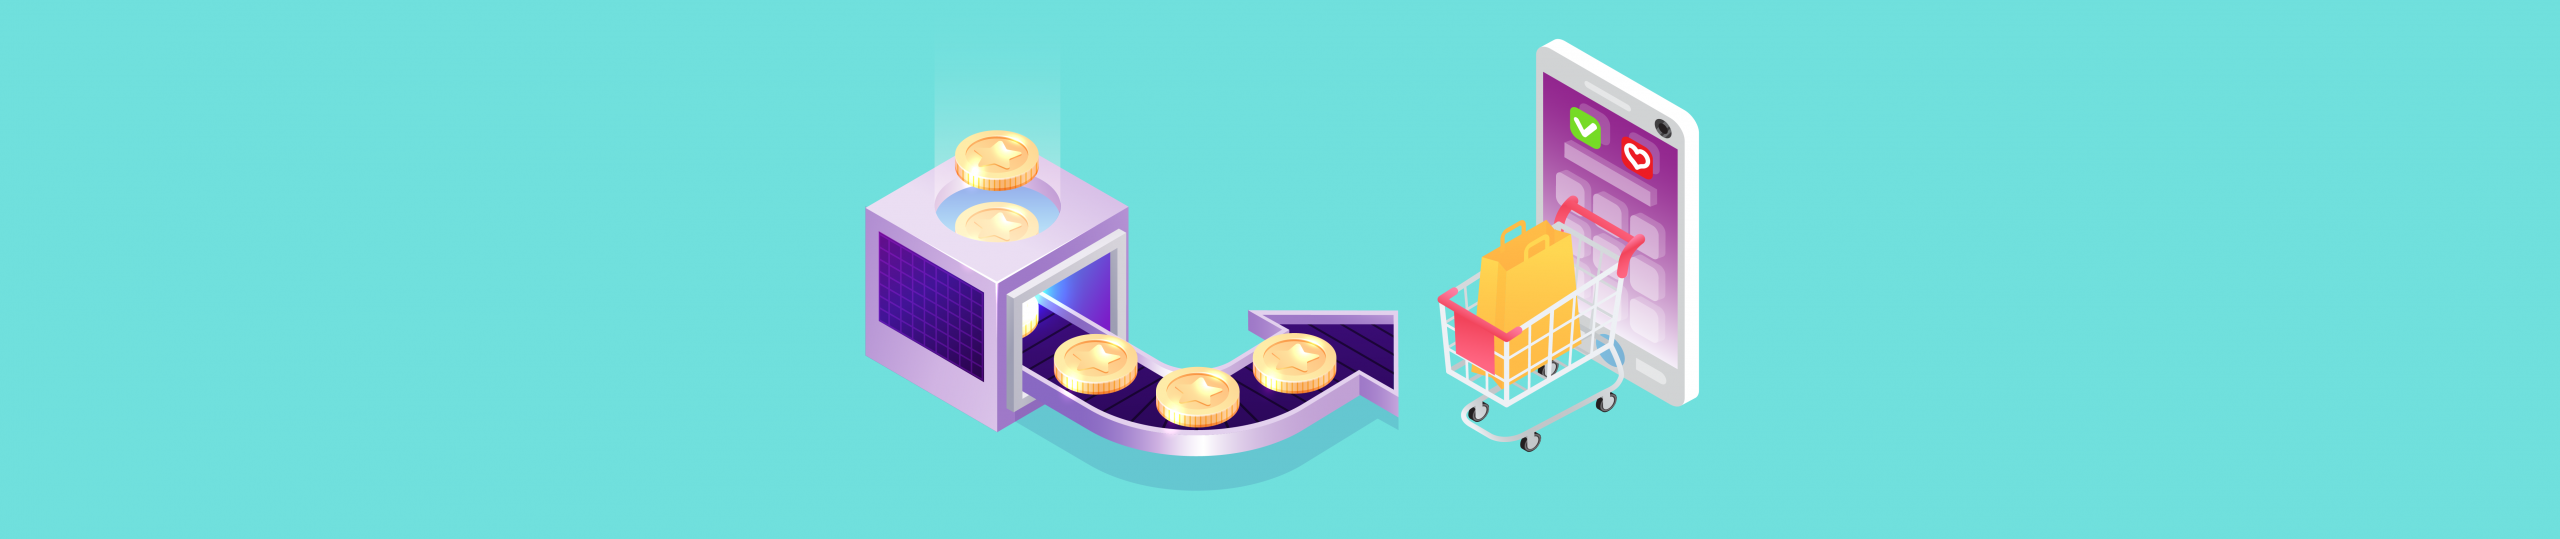 How Much Does It Cost to Run a Magento Store in 2021?